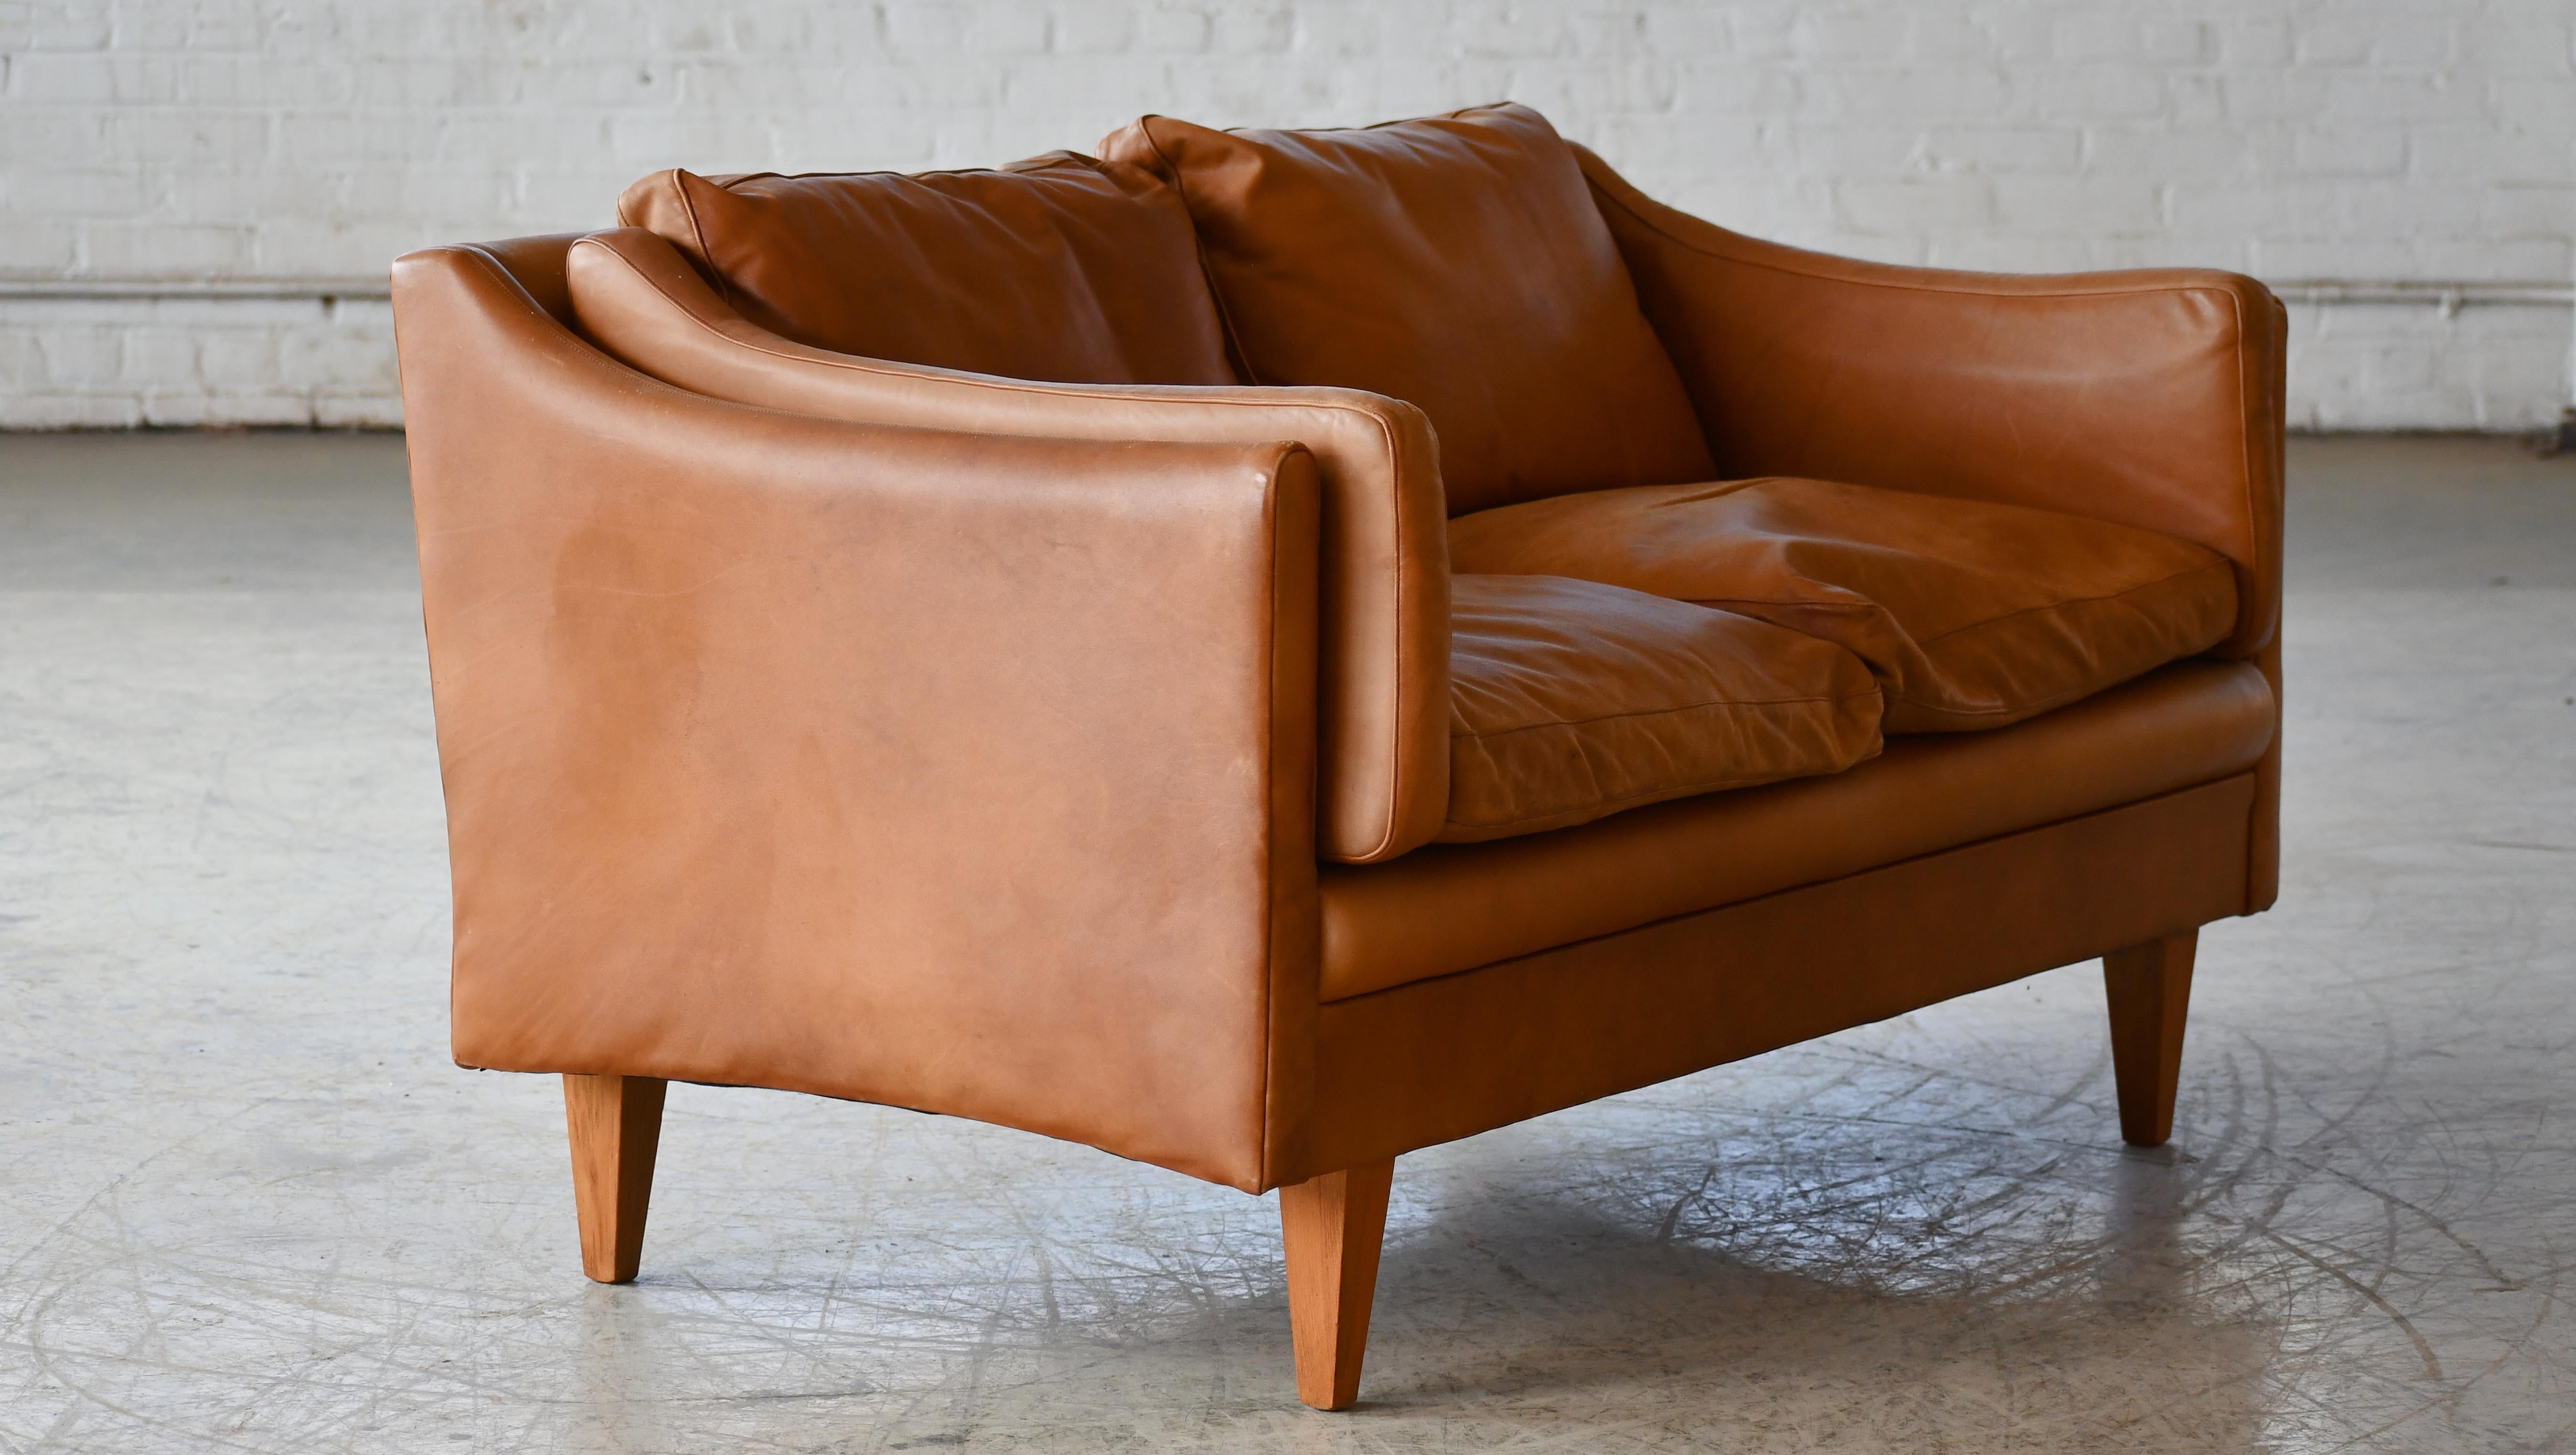 Classic Danish 1960s Two-Seat Sofa or Loveseat in Cognac Colored Leather  For Sale 1